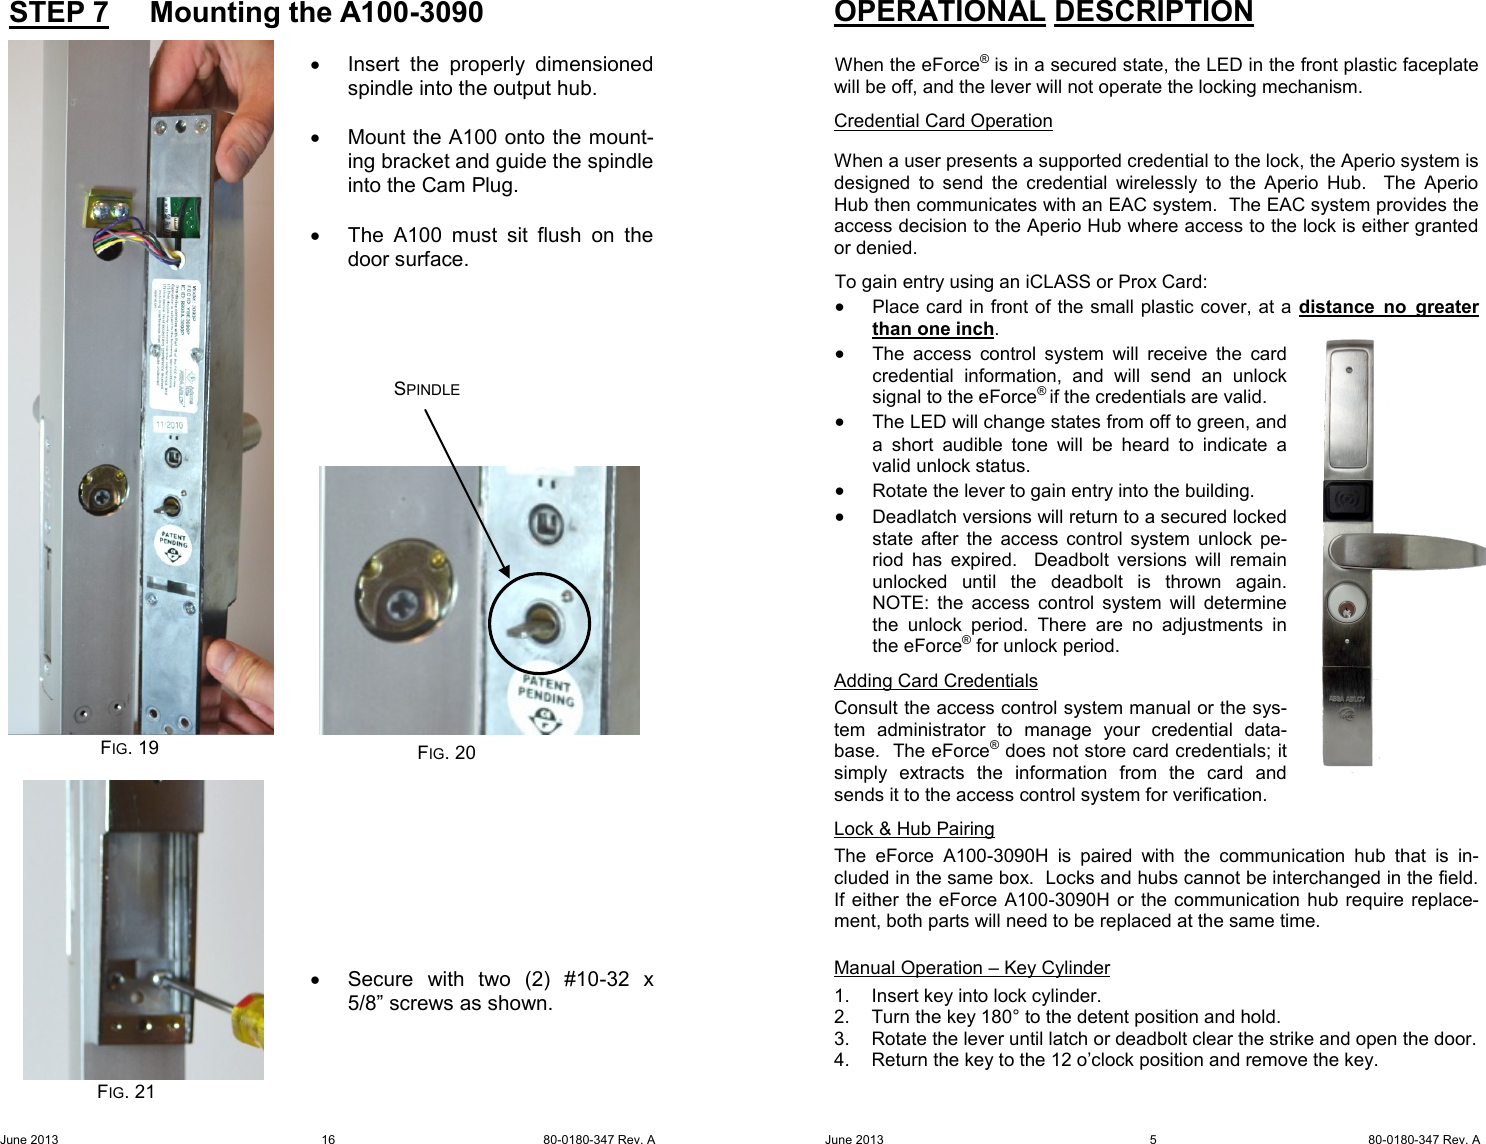 Page 5 of 10 - Adams Rite  A100-3090 Owner's Manual & Installation Instructions A100-3090H 80-0180-347 A